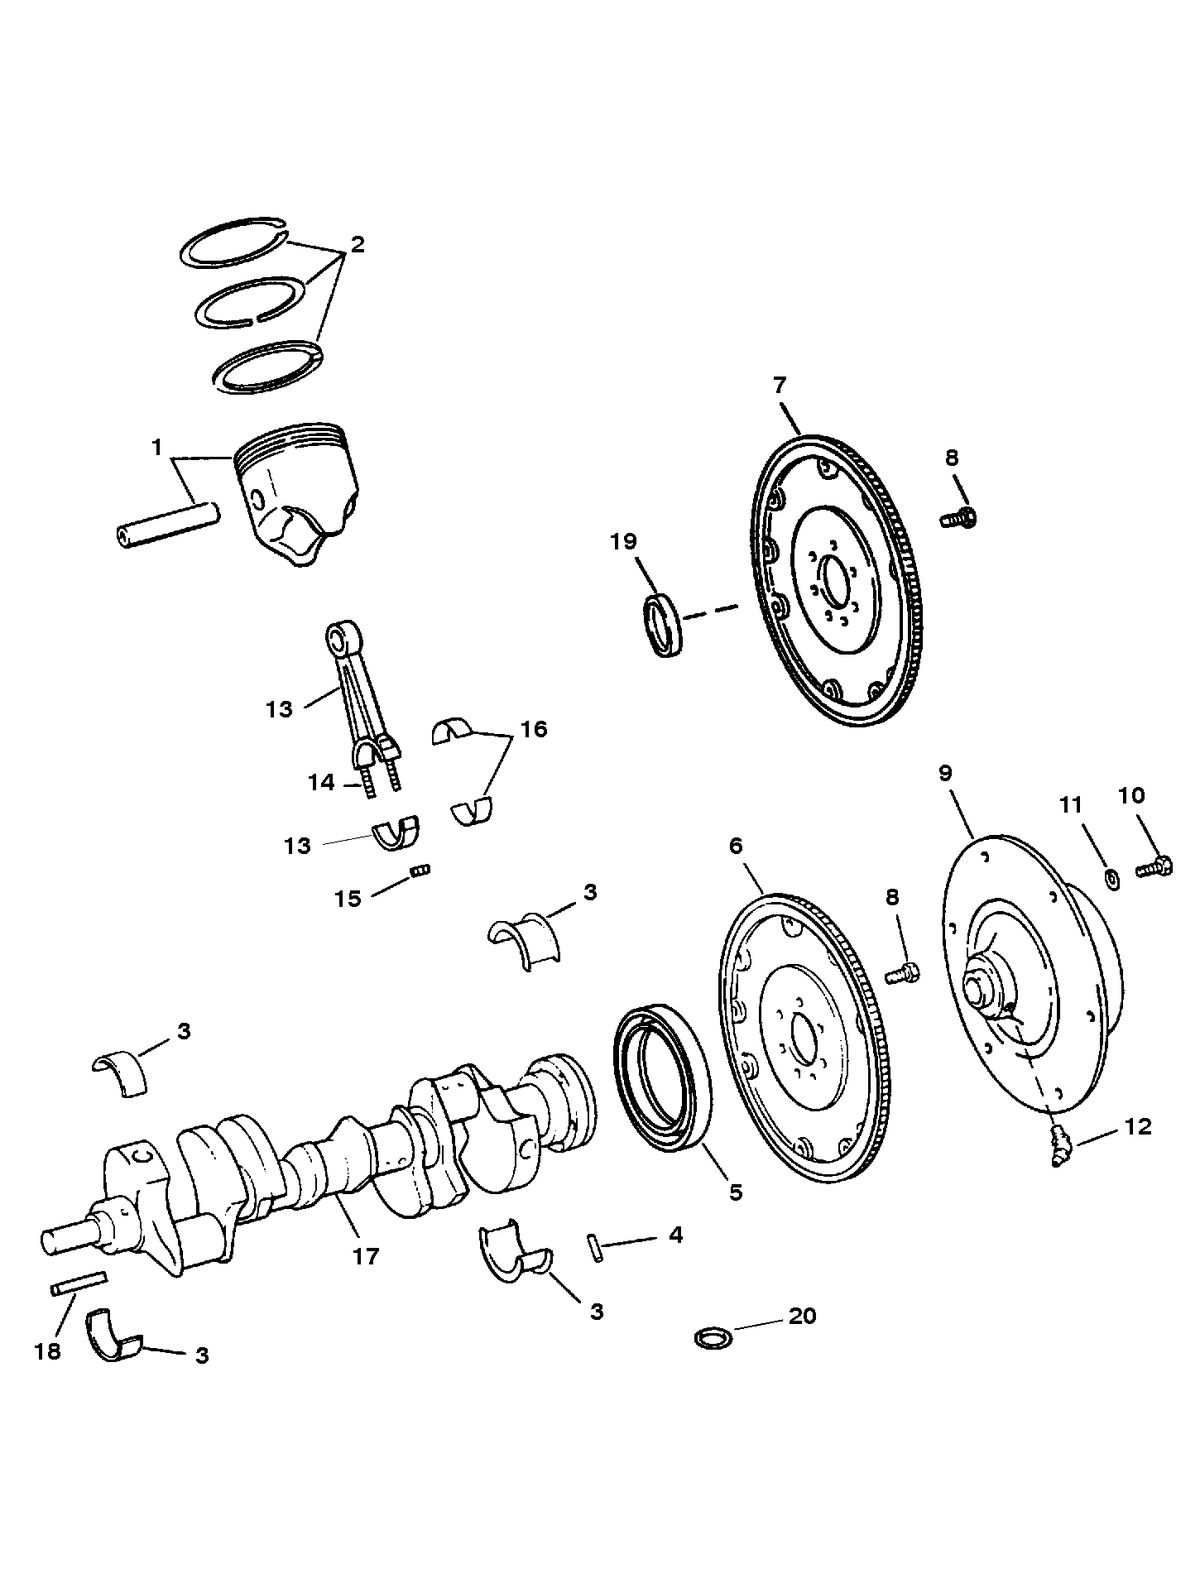 RACE STERNDRIVE 525 H.P. ENGINE CRANKSHAFT, PISTONS AND CONNECTING RODS